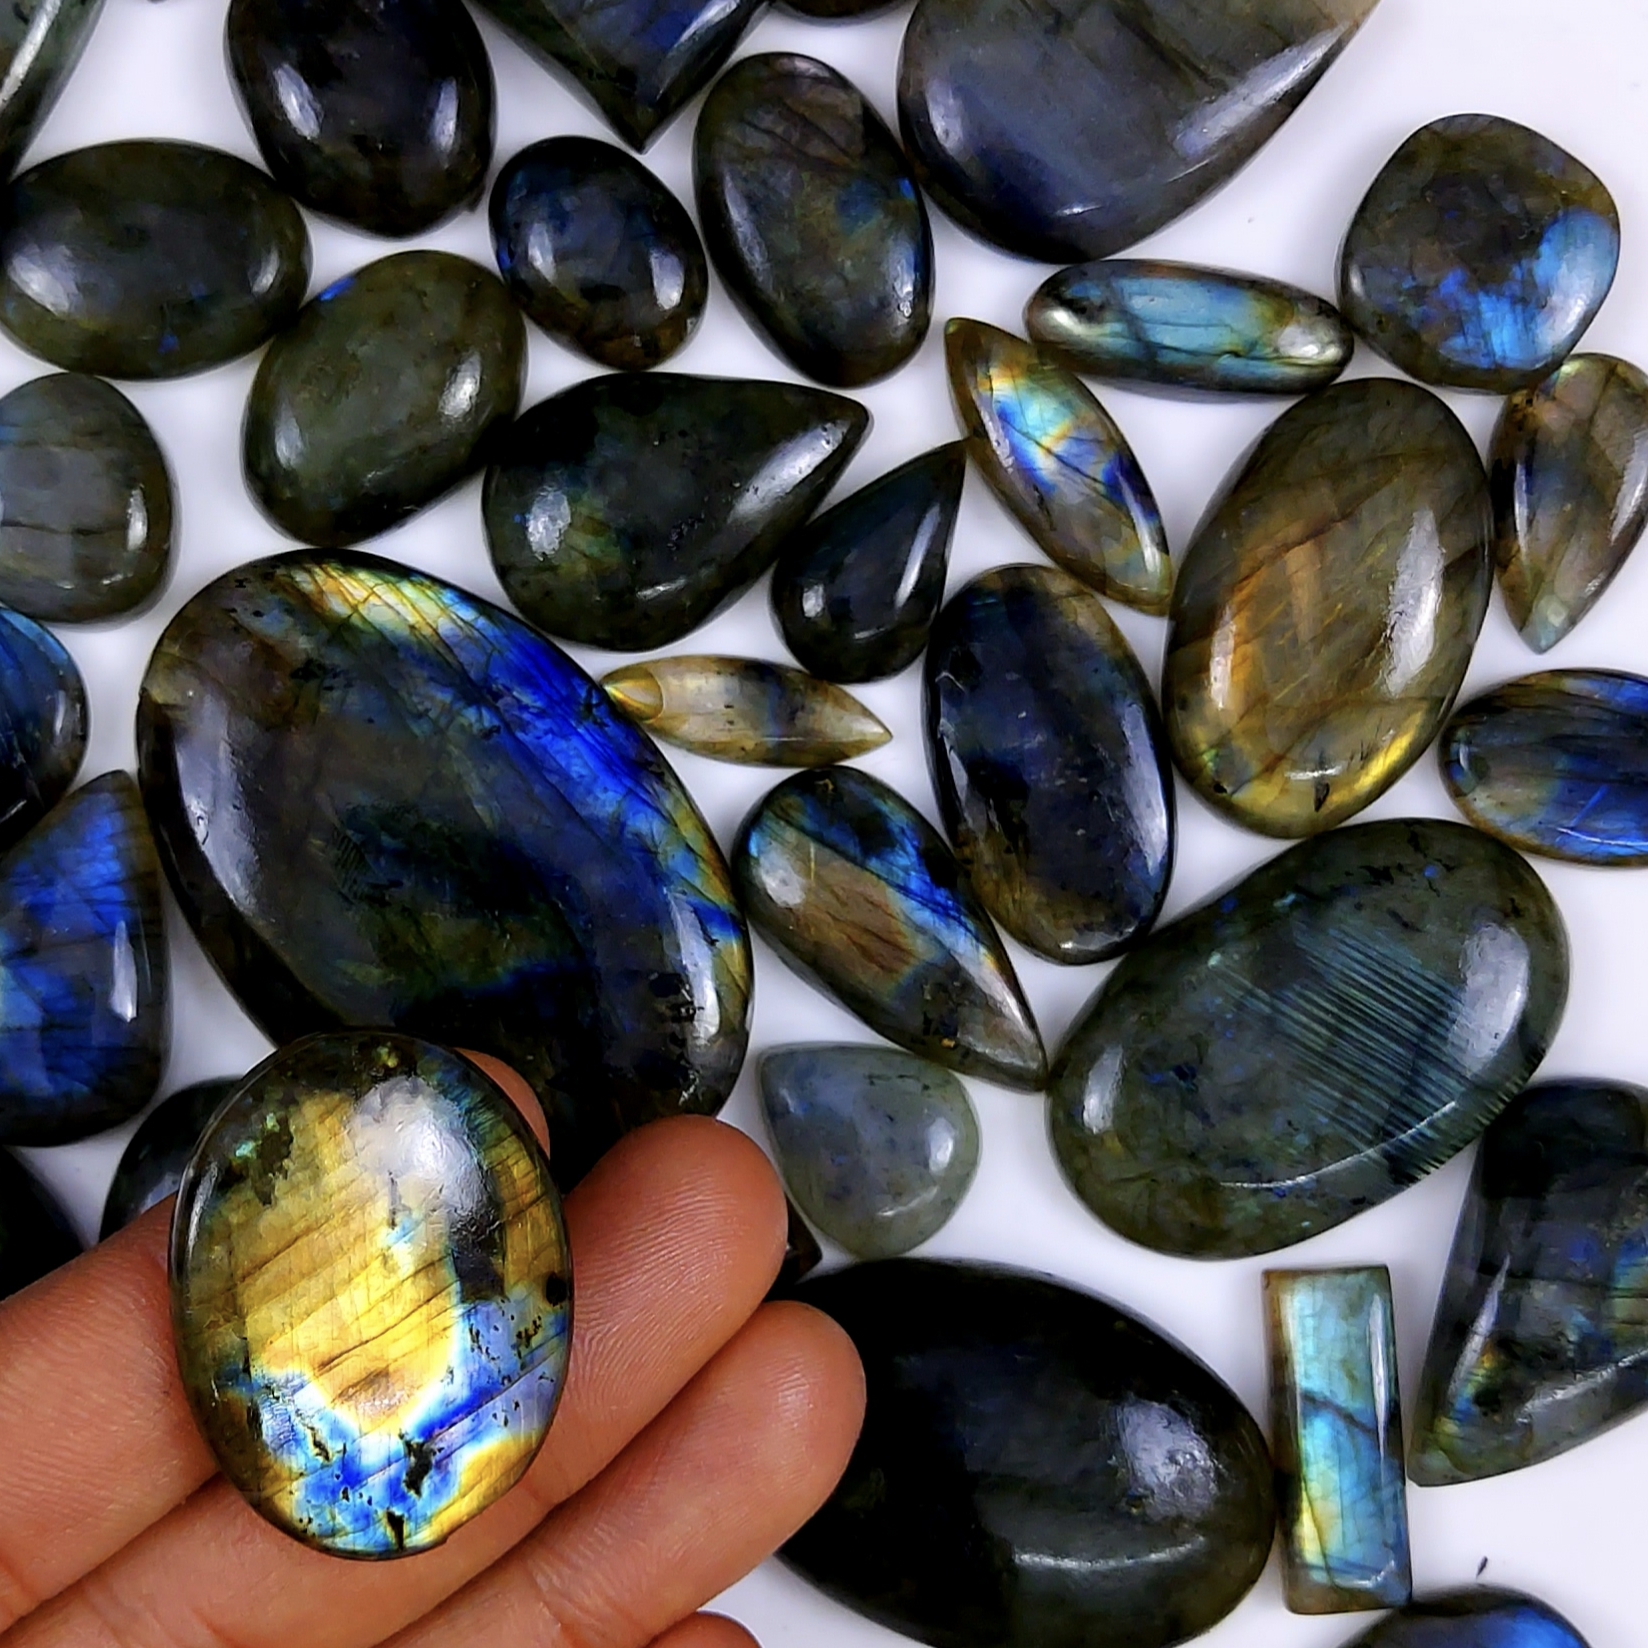 44pc 1567Cts Labradorite Cabochon Multifire Healing Crystal For Jewelry Supplies, Labradorite Necklace Handmade Wire Wrapped Gemstone Pendant 55x27 20x14mm#6333